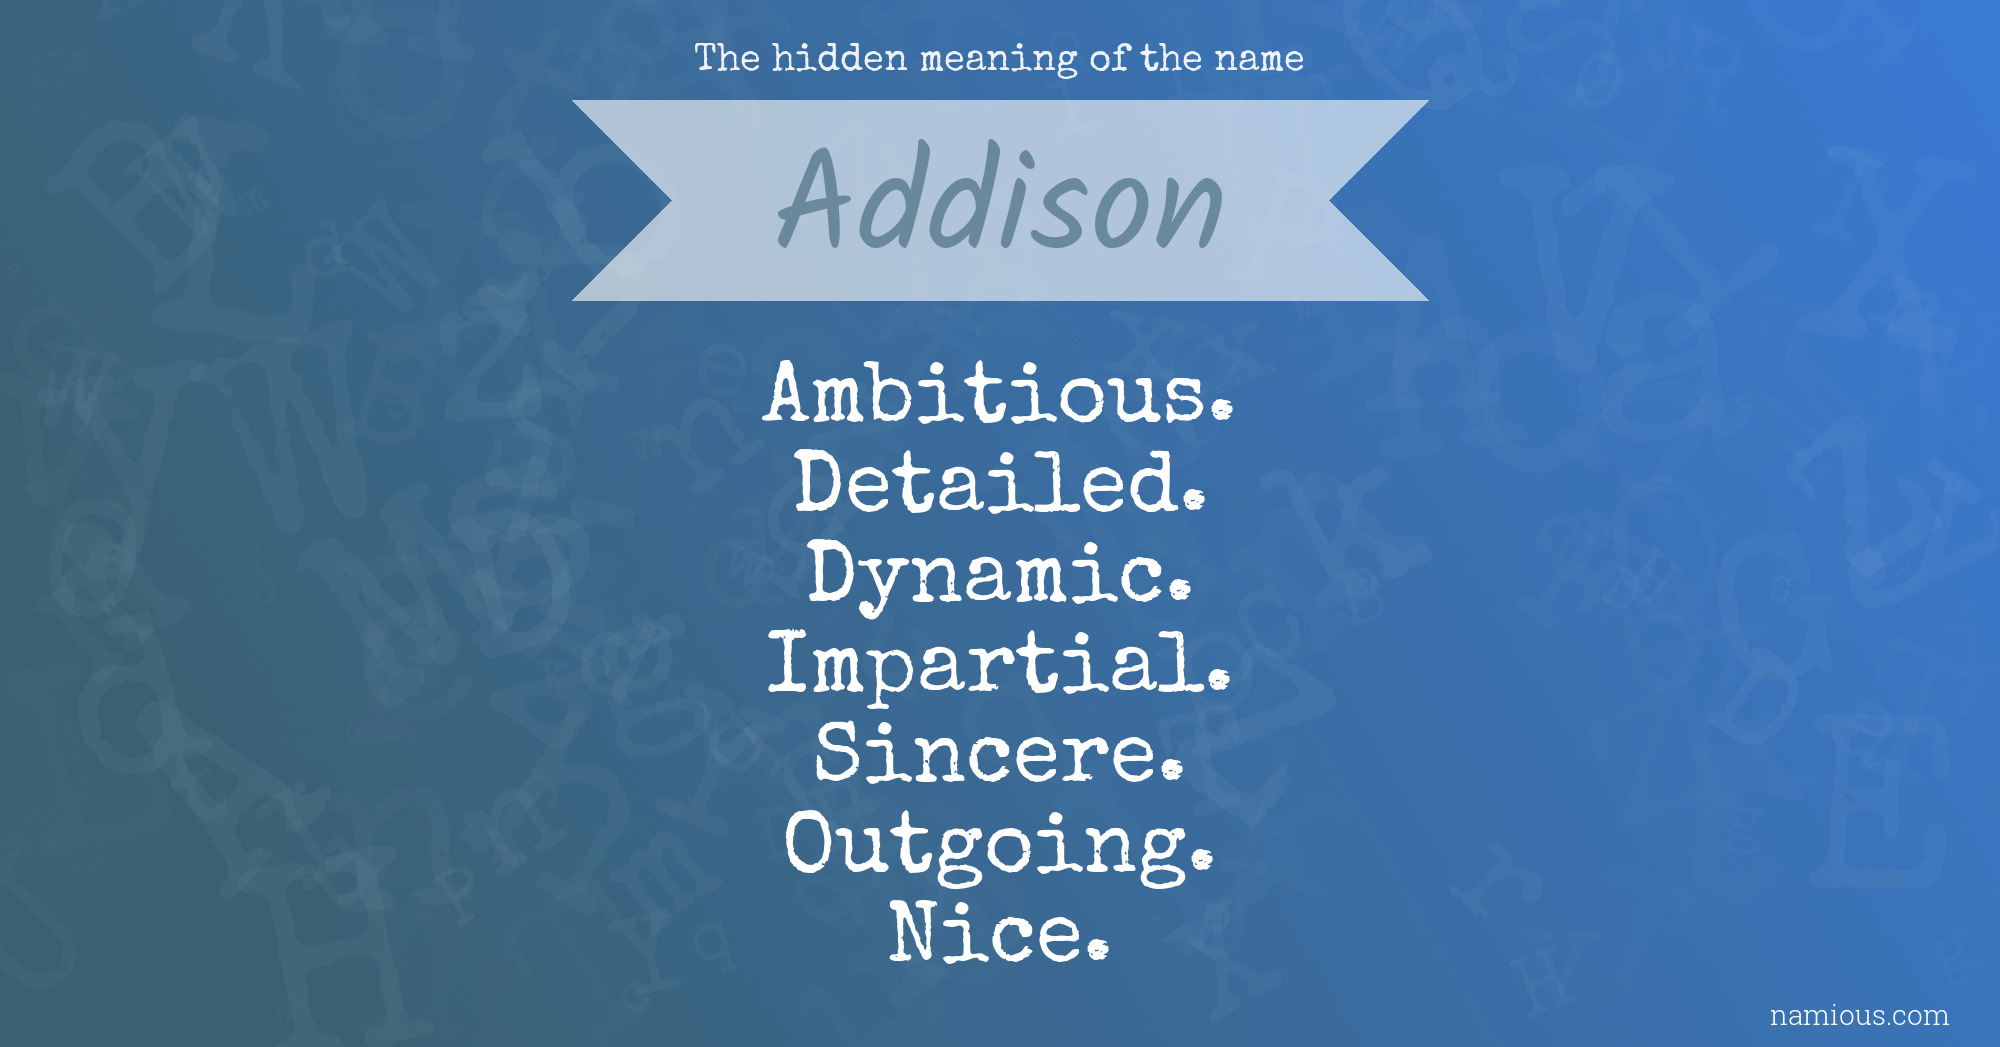 The hidden meaning of the name Addison